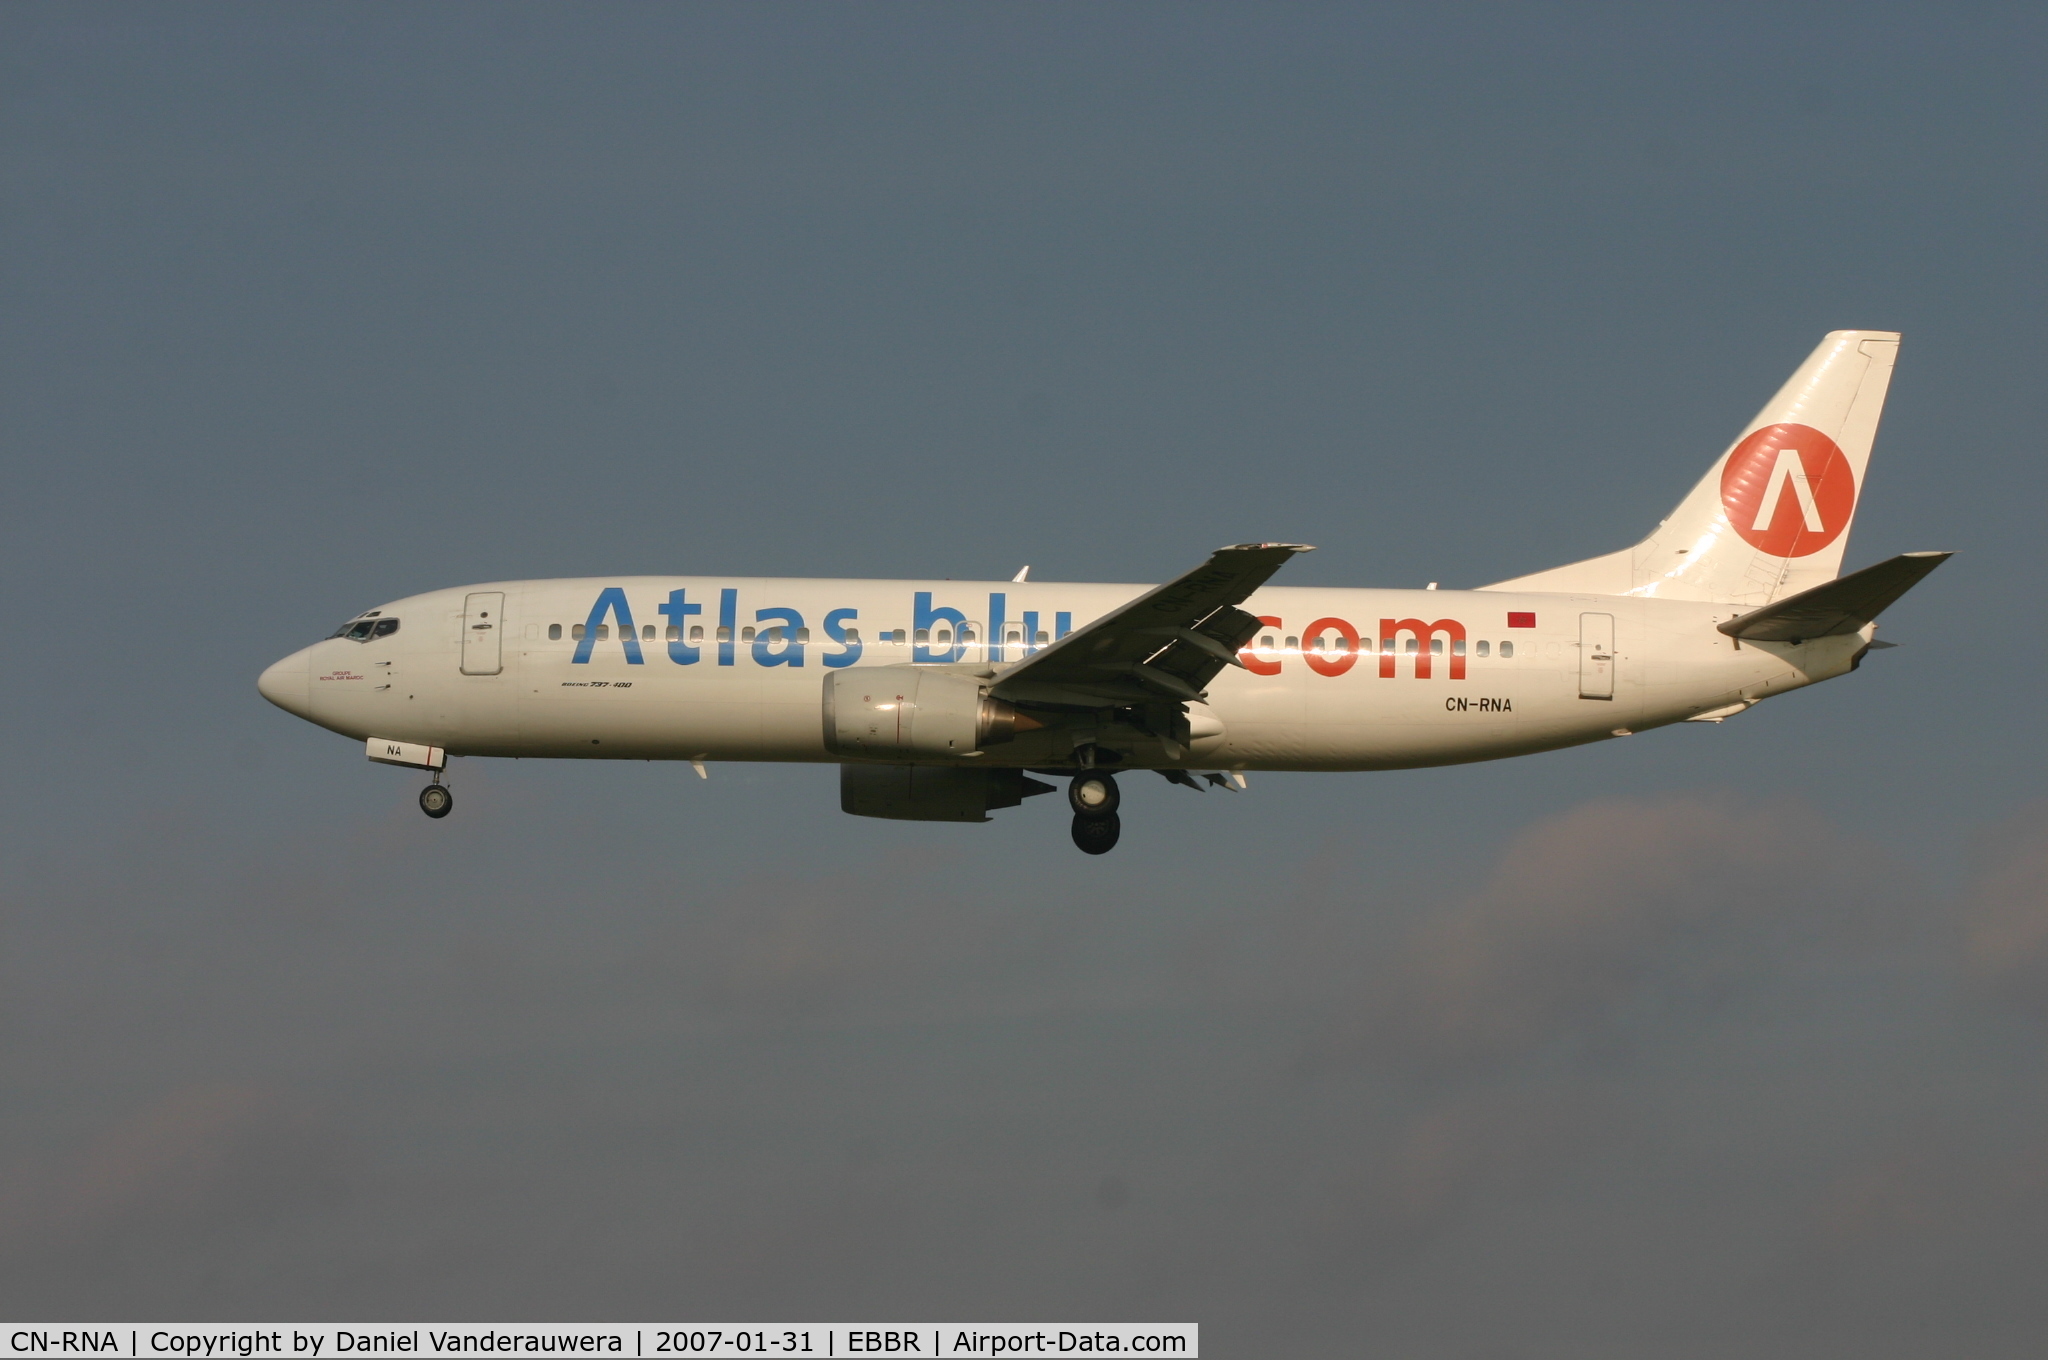 CN-RNA, 1993 Boeing 737-4B6 C/N 26531, arrival of flight 8A412  -  the tail is still in the sunlight ...